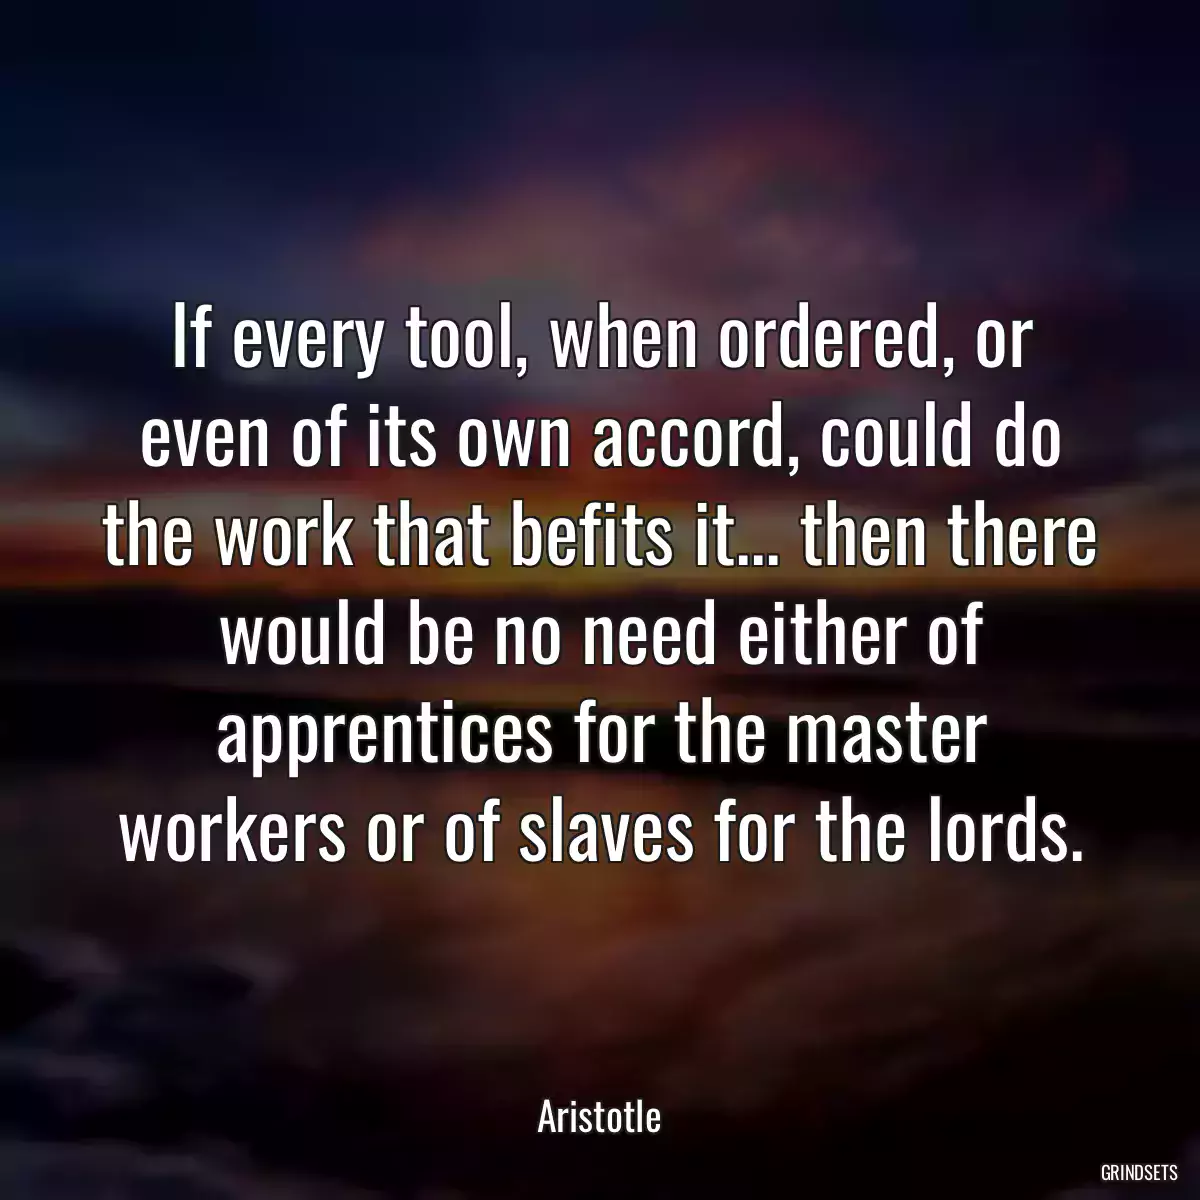 If every tool, when ordered, or even of its own accord, could do the work that befits it... then there would be no need either of apprentices for the master workers or of slaves for the lords.